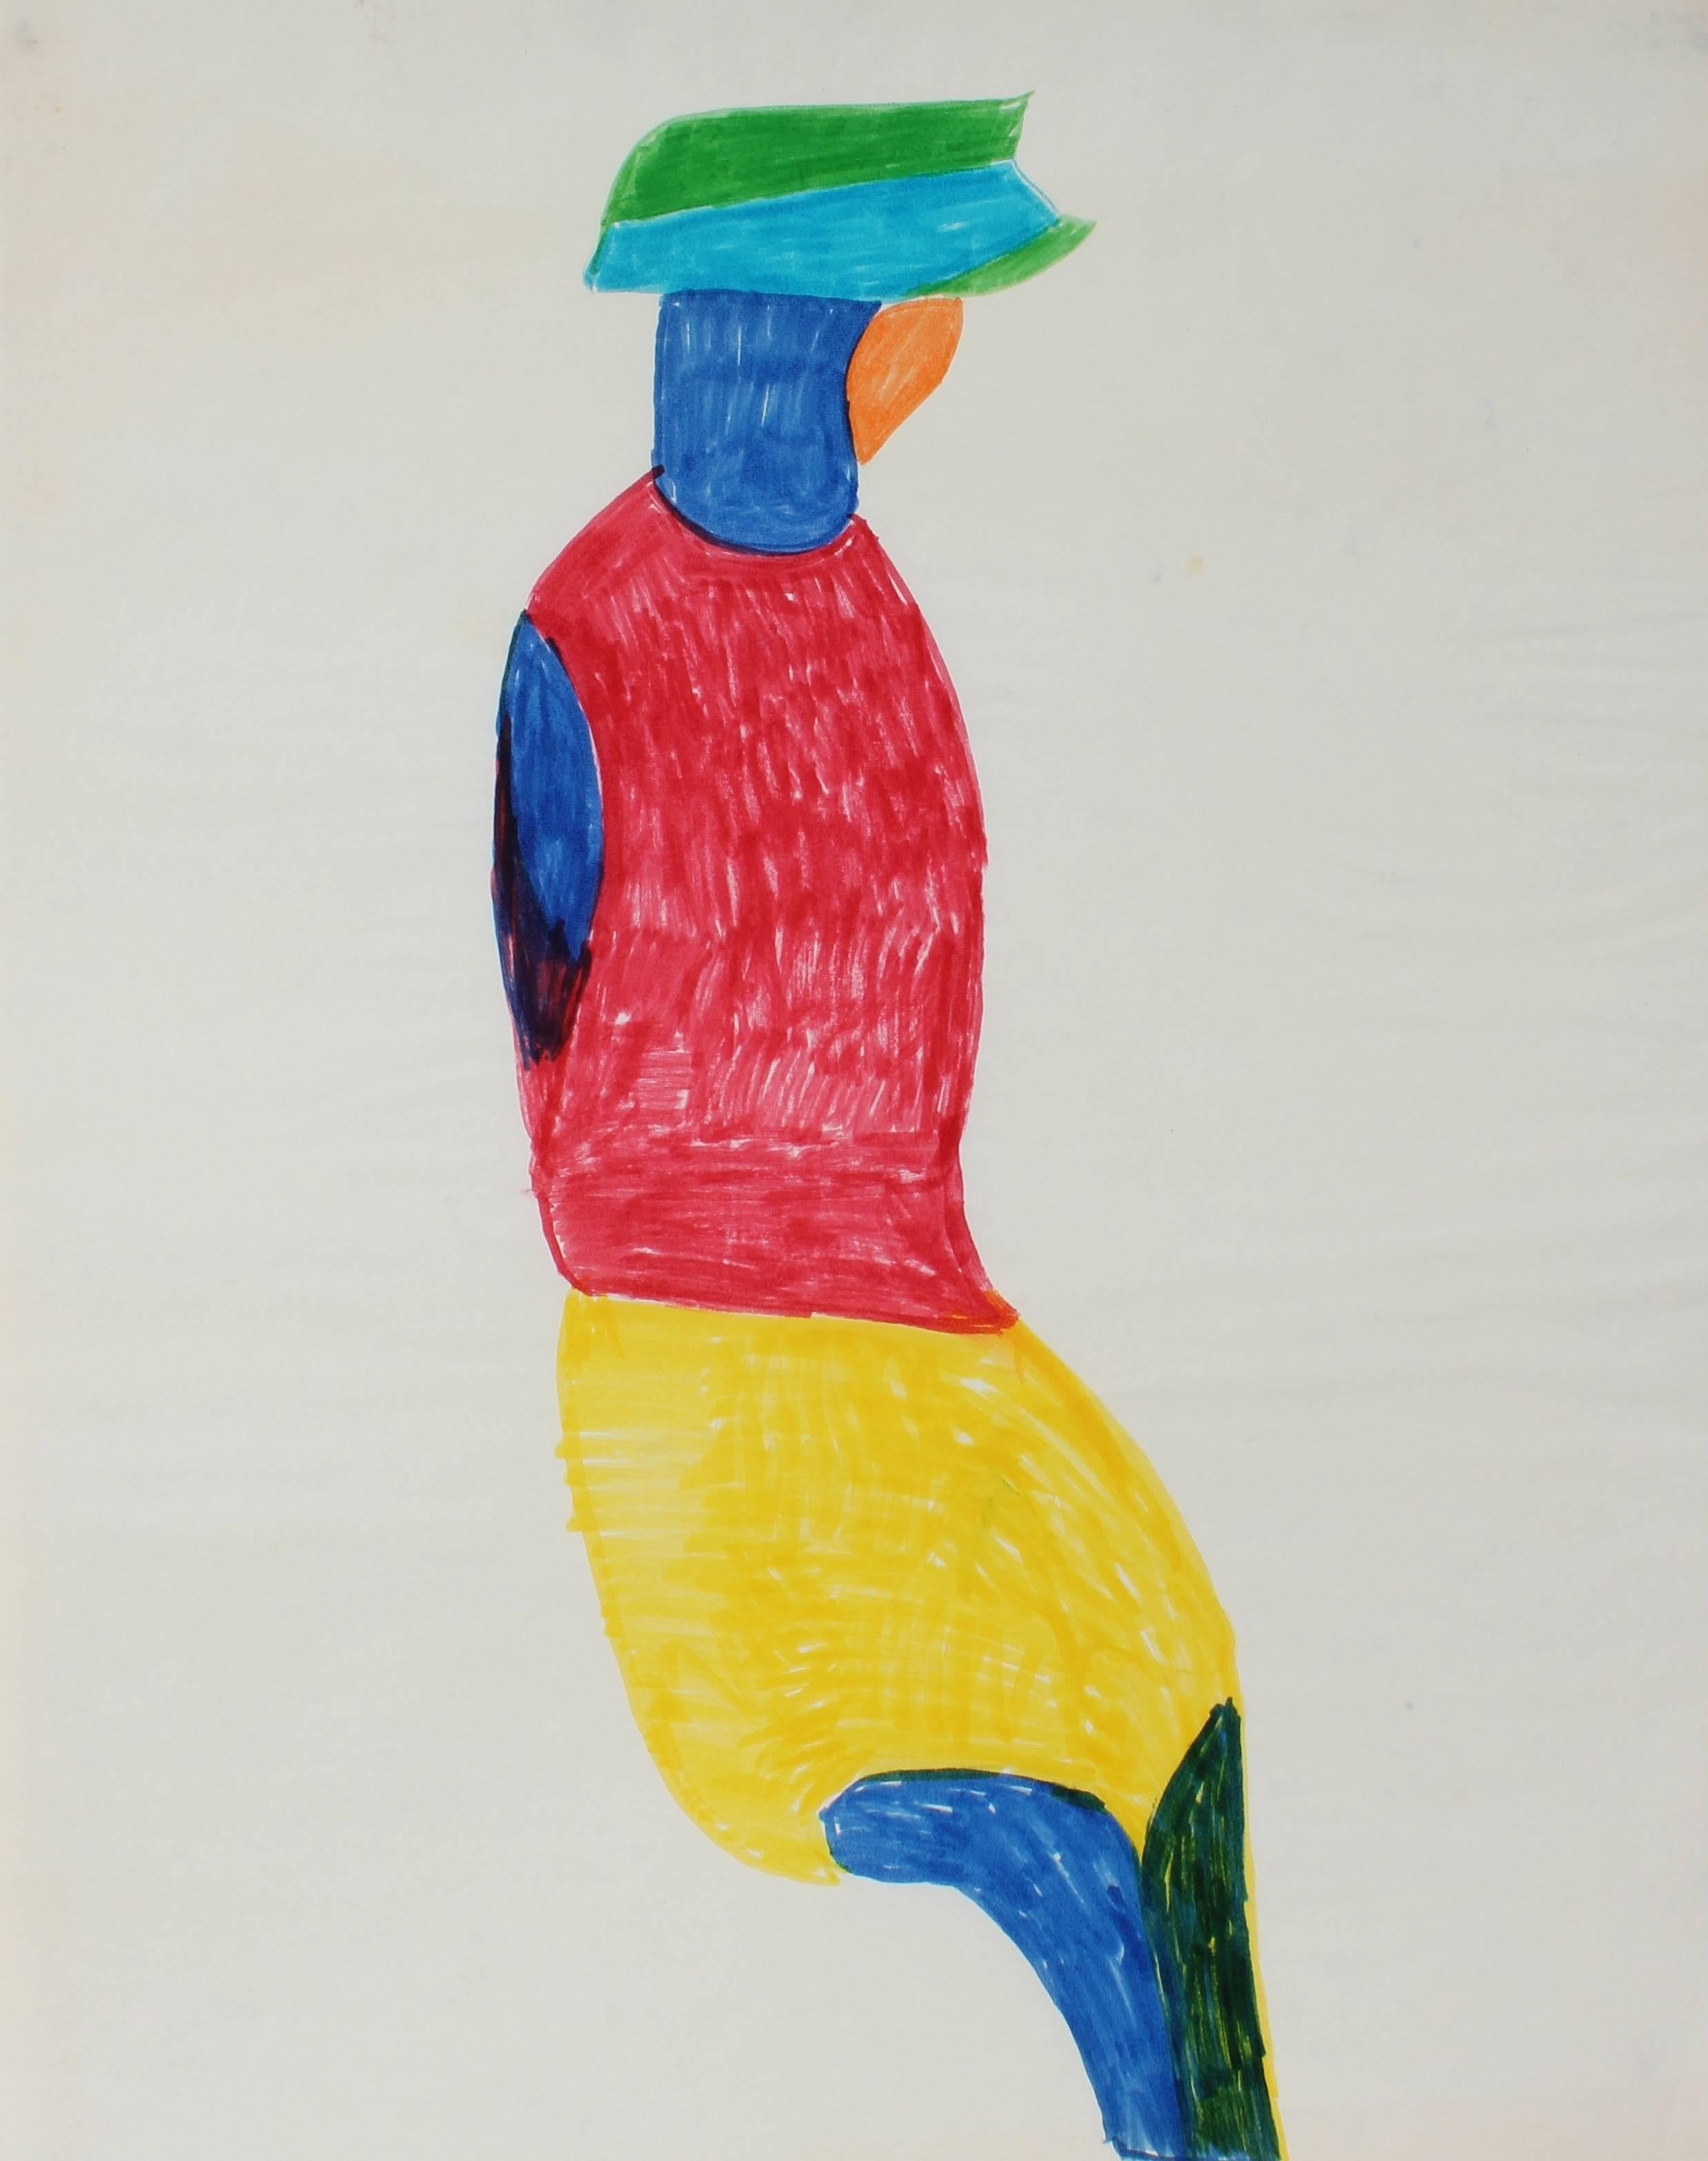 Abstracted Seated Figure, Felt Pen on Paper, 1970s